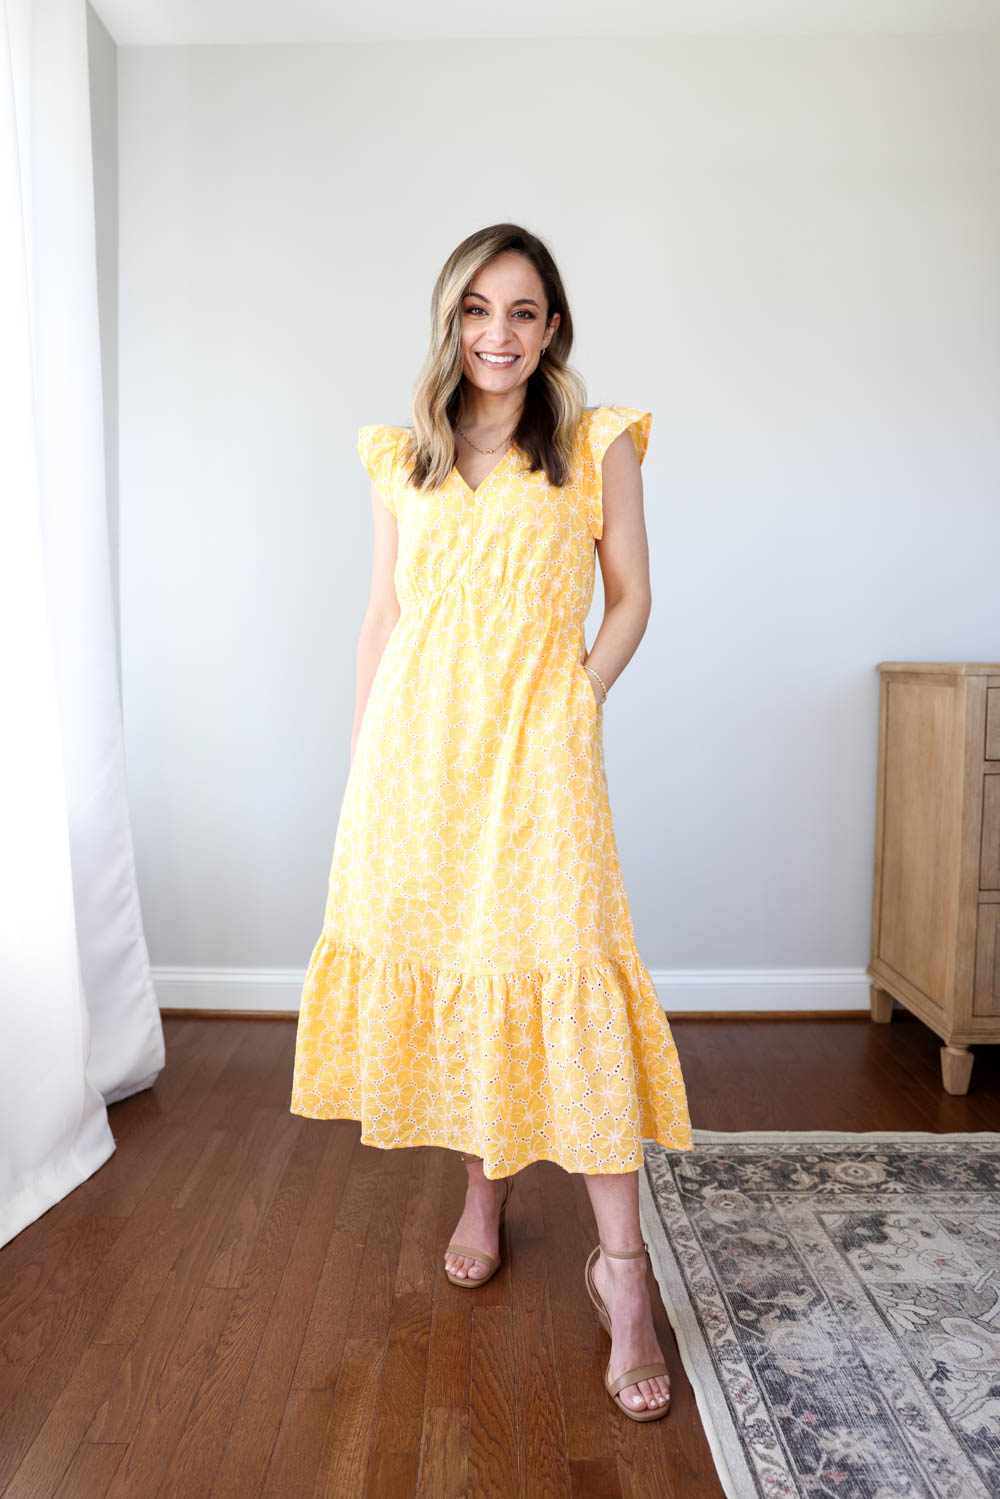 Petite-friendly spring and summer dresses from Walmart | affordable spring dresses | walmart dresses | affordable fashion